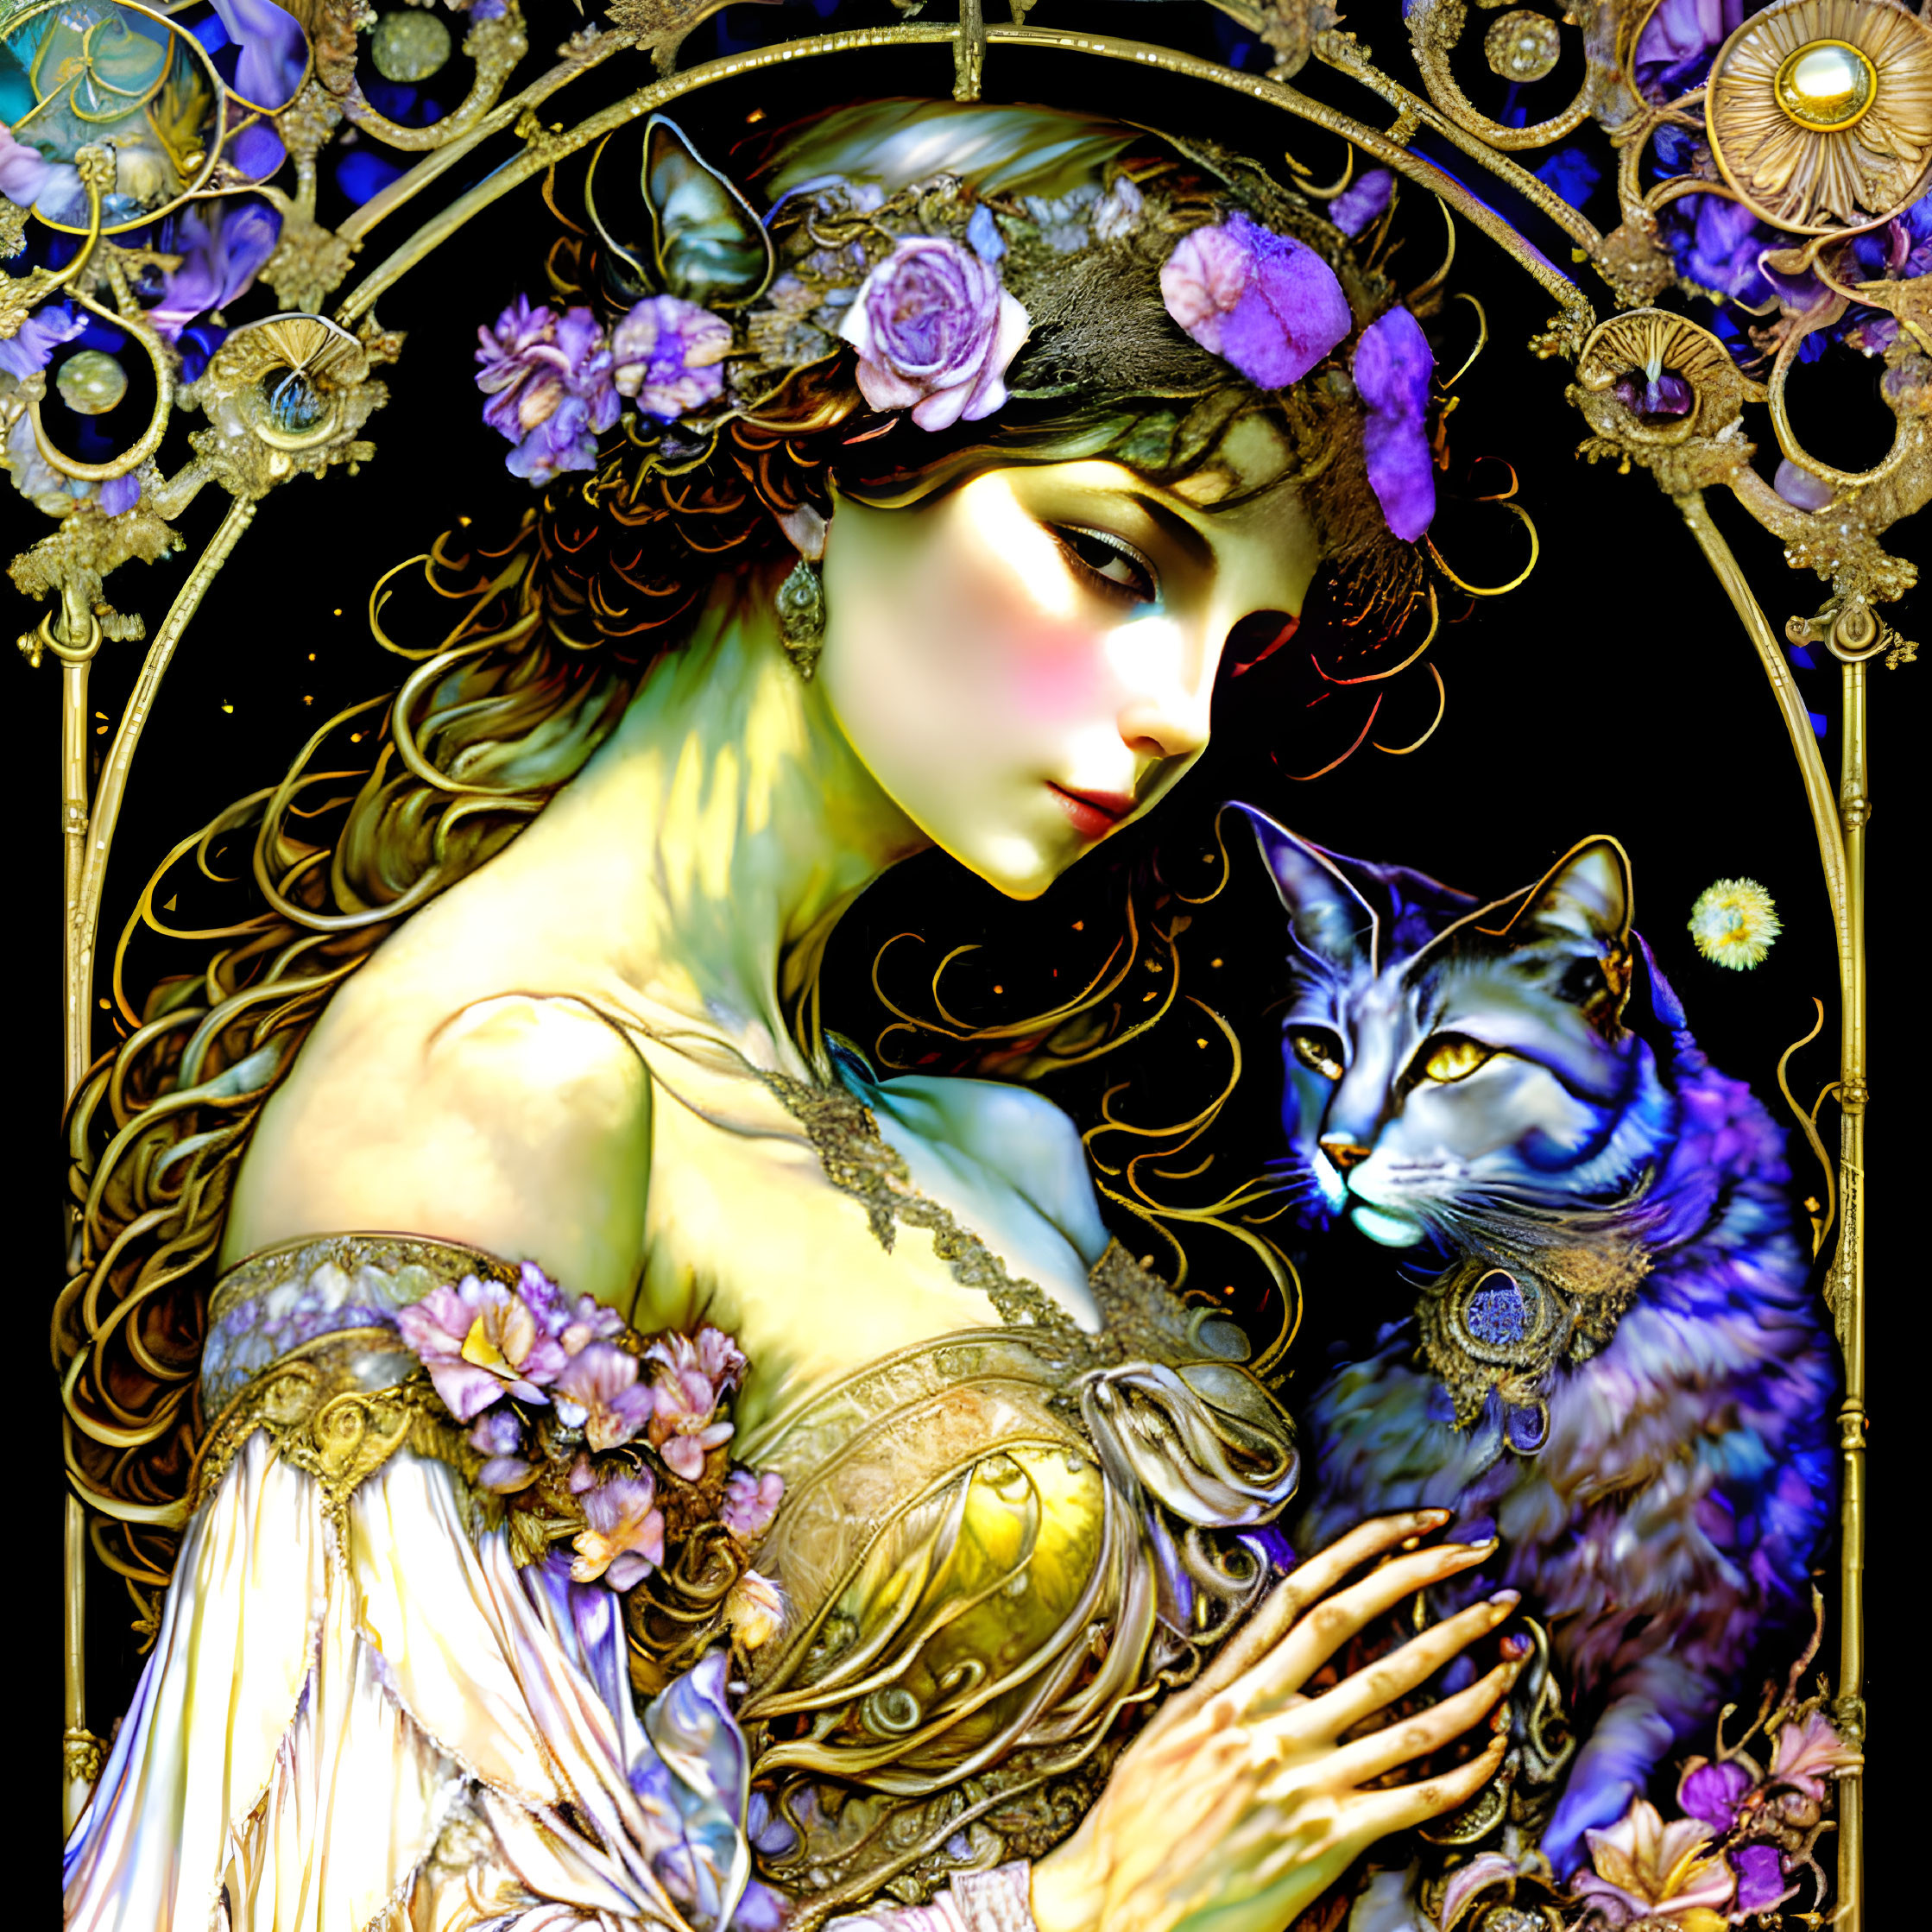 Detailed artwork of woman with flowers and cat in ornate frames